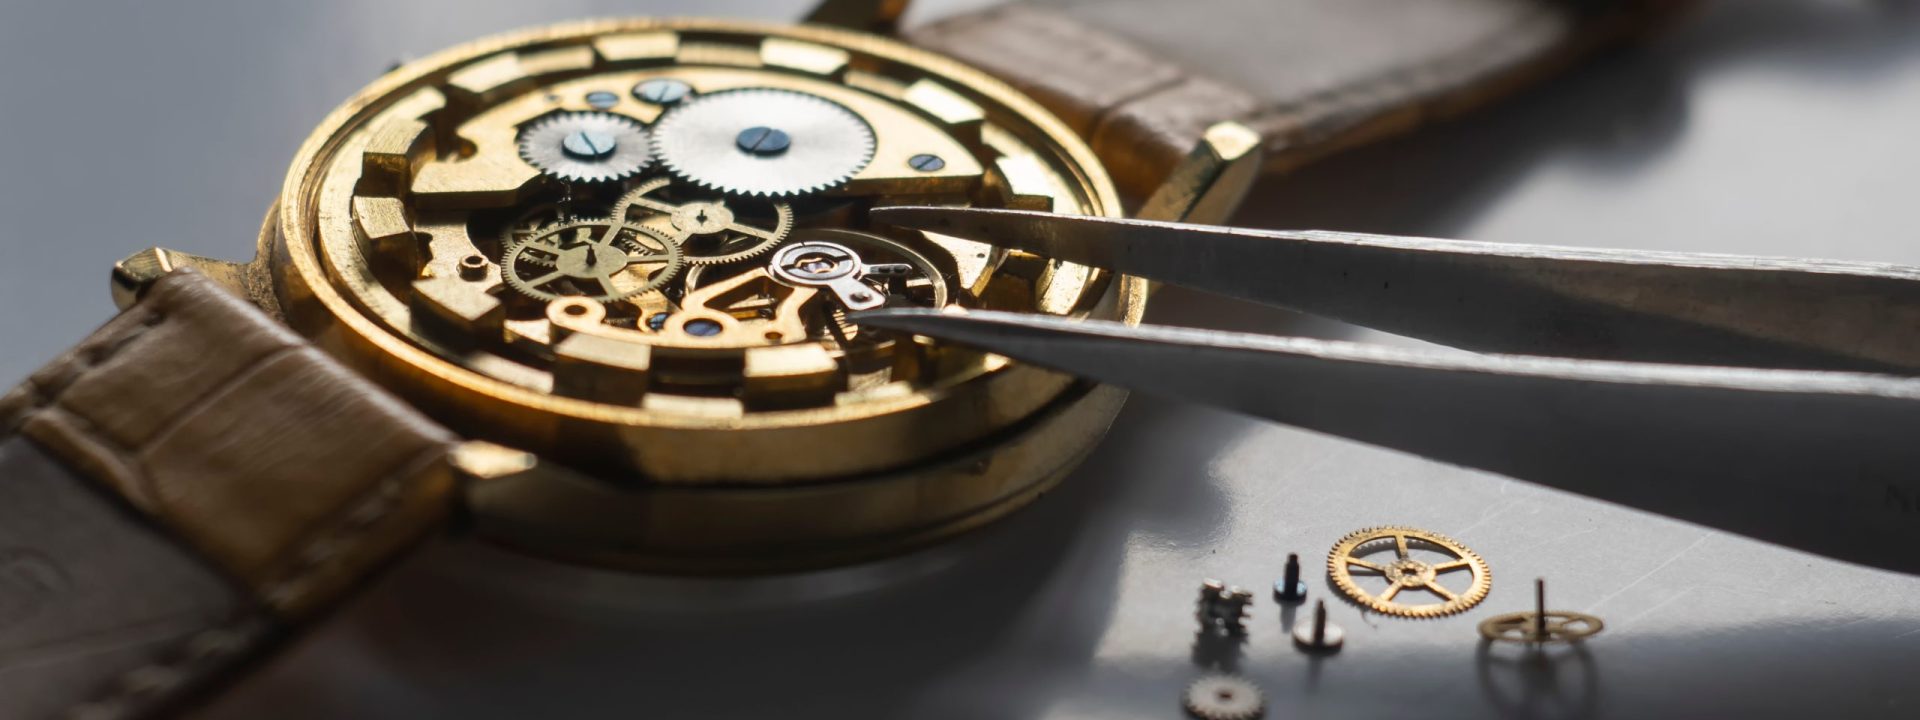 Watchmaker using tweezers to work on inner gears and crystals of a fine watch.